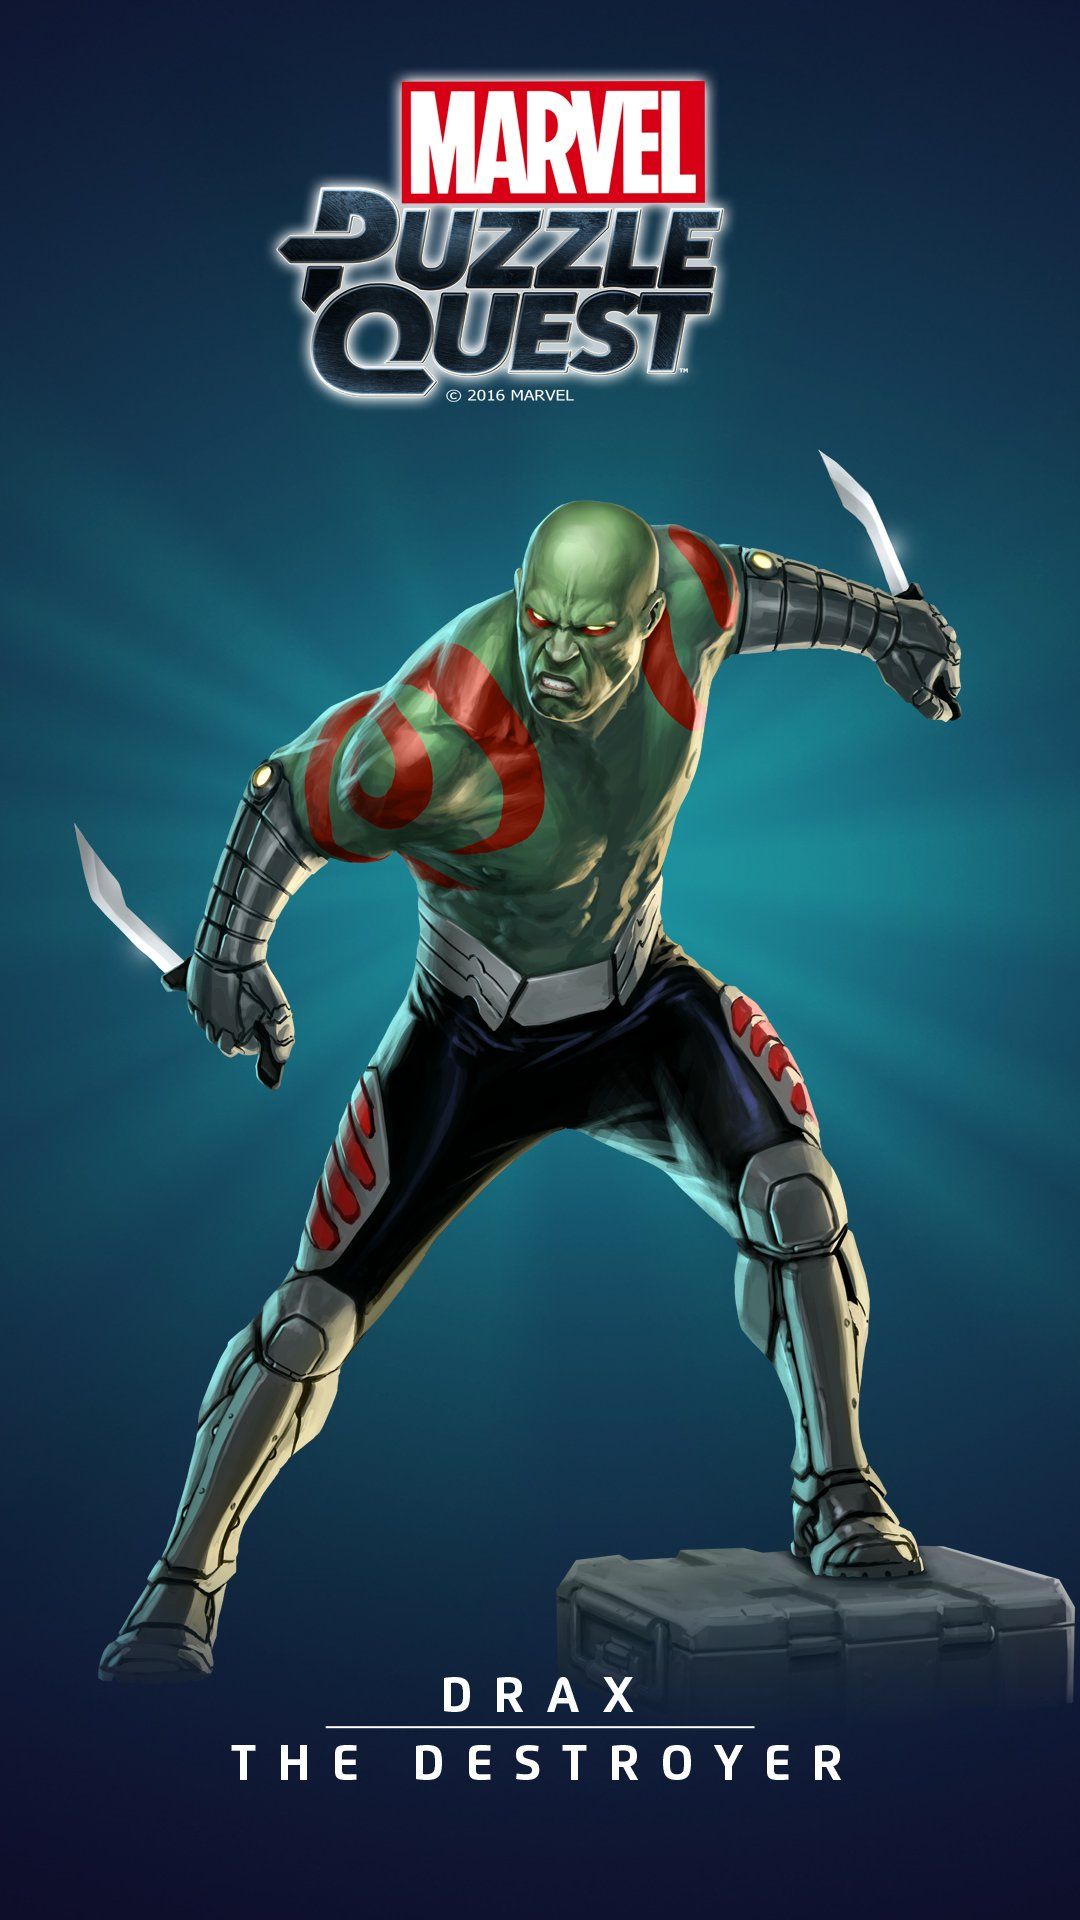 Marvel Puzzle Quest strength is on display in new wallpaper featuring Drax in #MarvelPuzzleQuest!